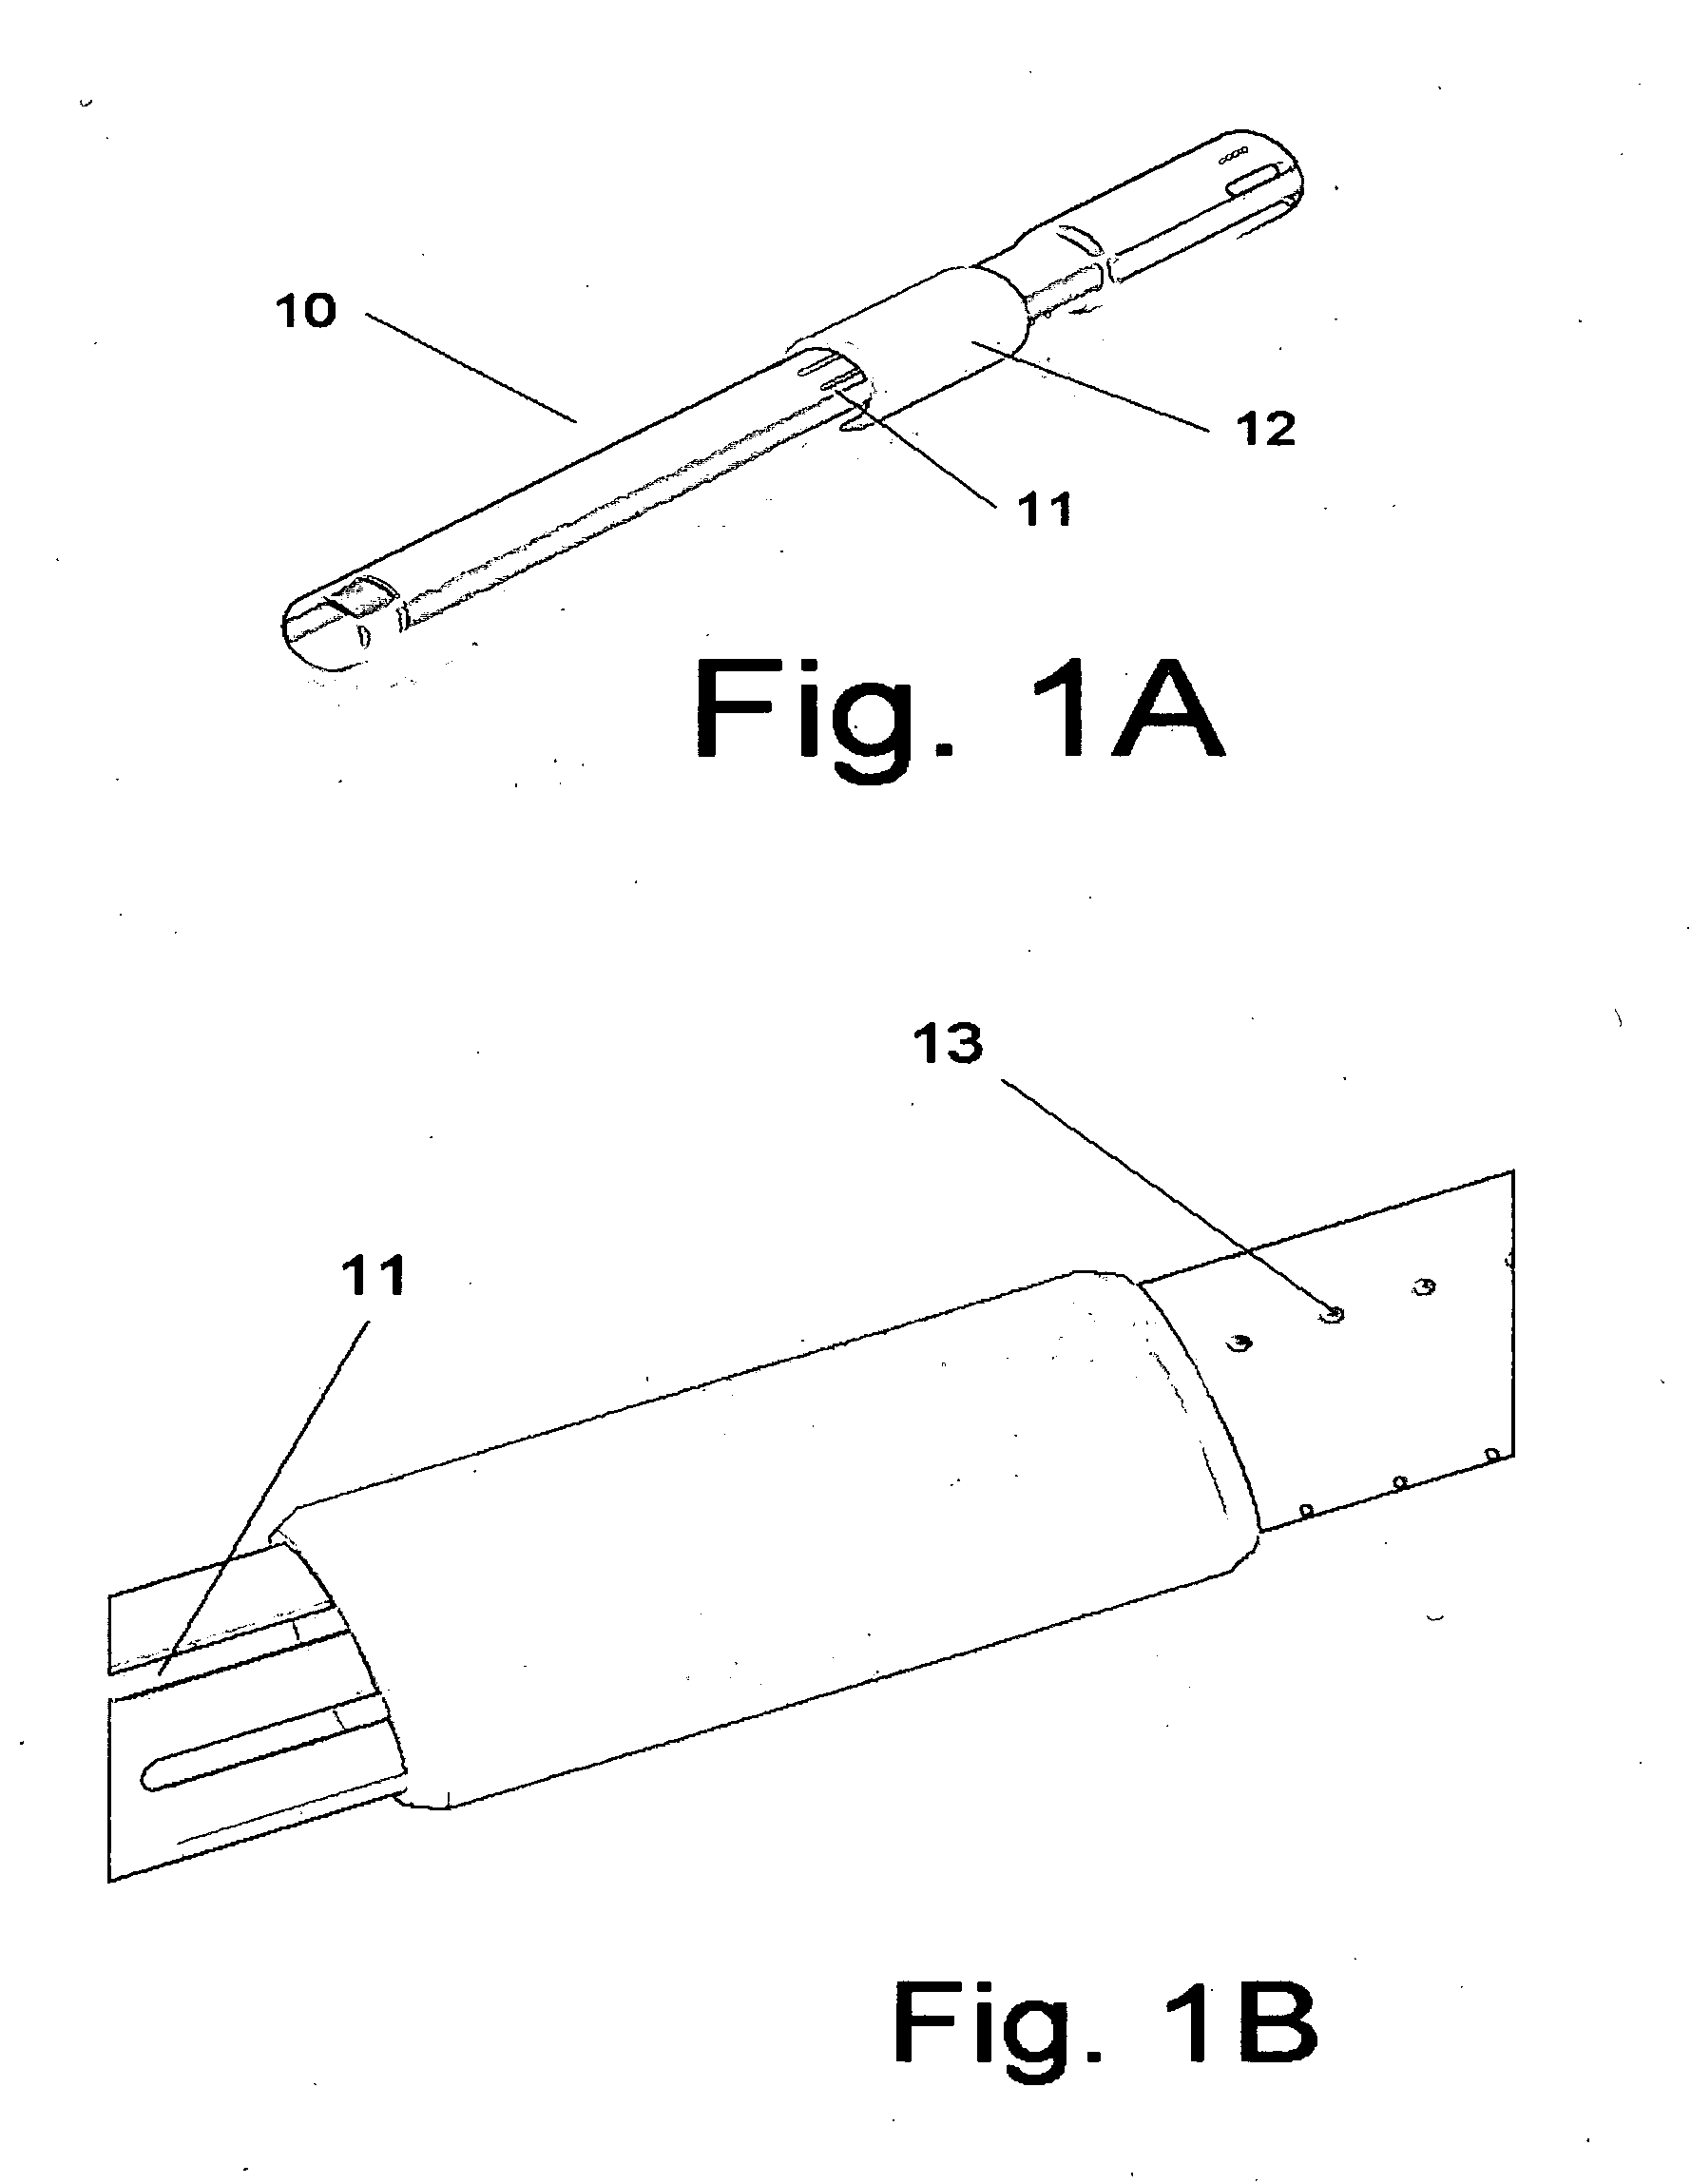 Paintball gun barrel modification and associated mechanism to allow for removal of ruptured paint ball material during game or other battle type operation